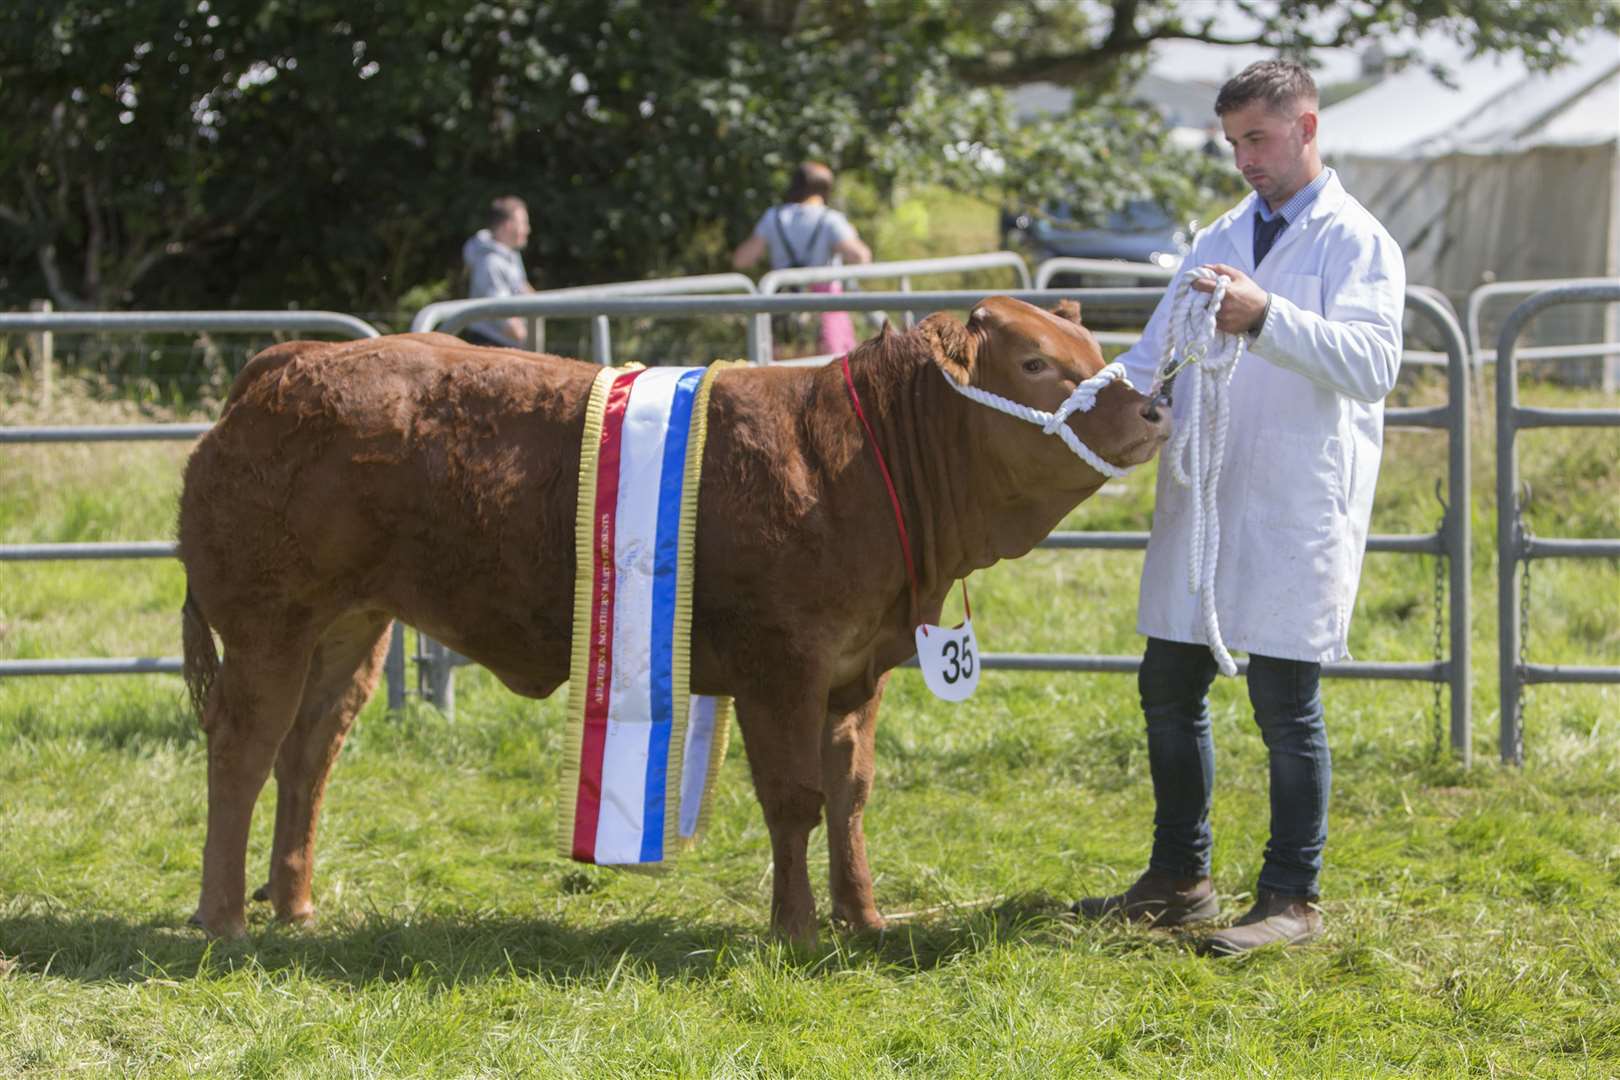 Kris Sutherland, Dunbeath, with his reserve supreme champion of champions, supreme cattle champion and commercial cattle champion, She's a Belter. The 13-month-old cross Limousin heifer was bought at Thainstone from Gordon Cameron. Picture: Robert MacDonald / Northern Studios